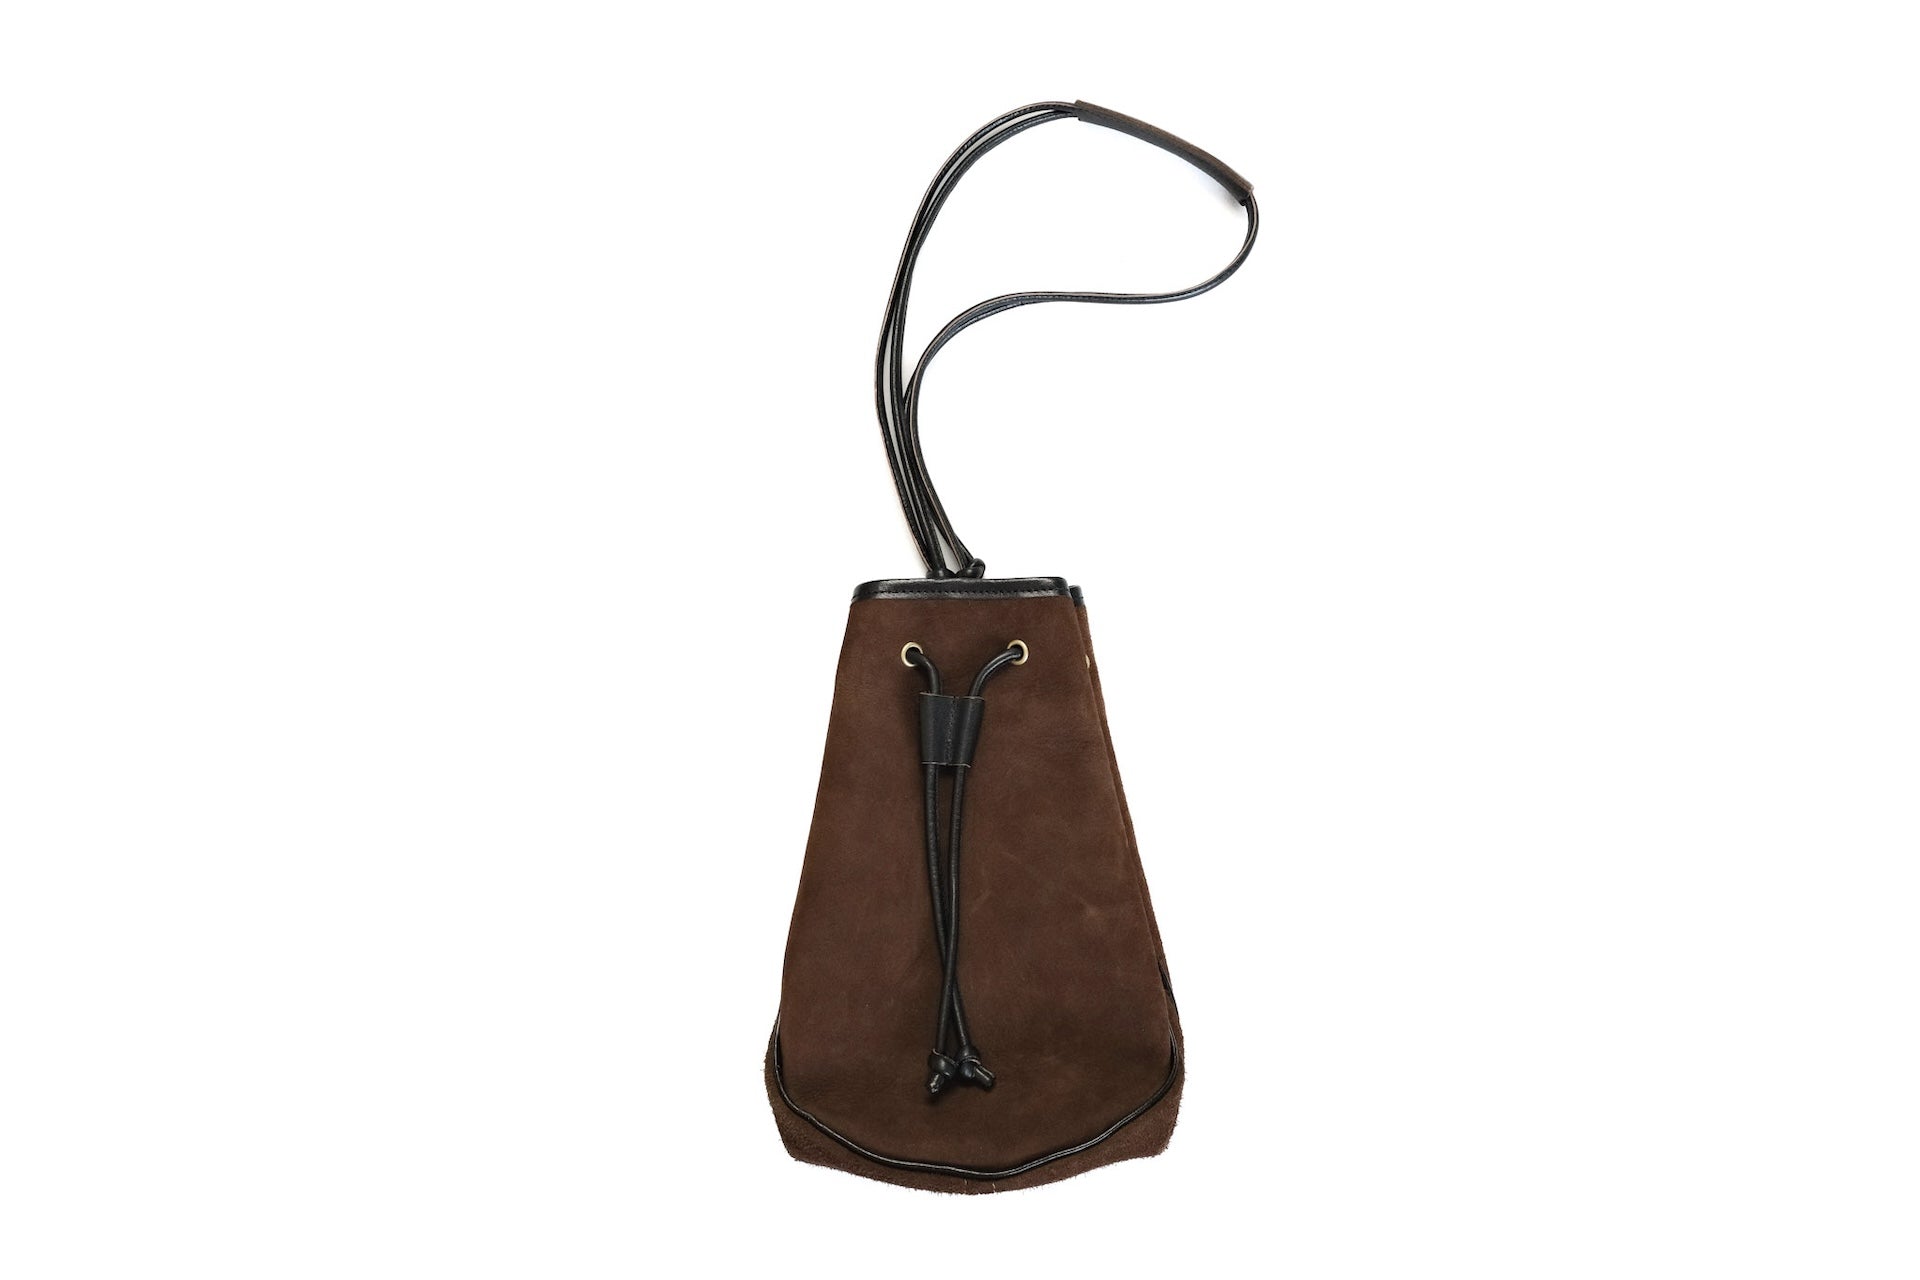 Inception by Accel Co. Rough Out Horsebutt Pouch Bag (Chocolate Brown)